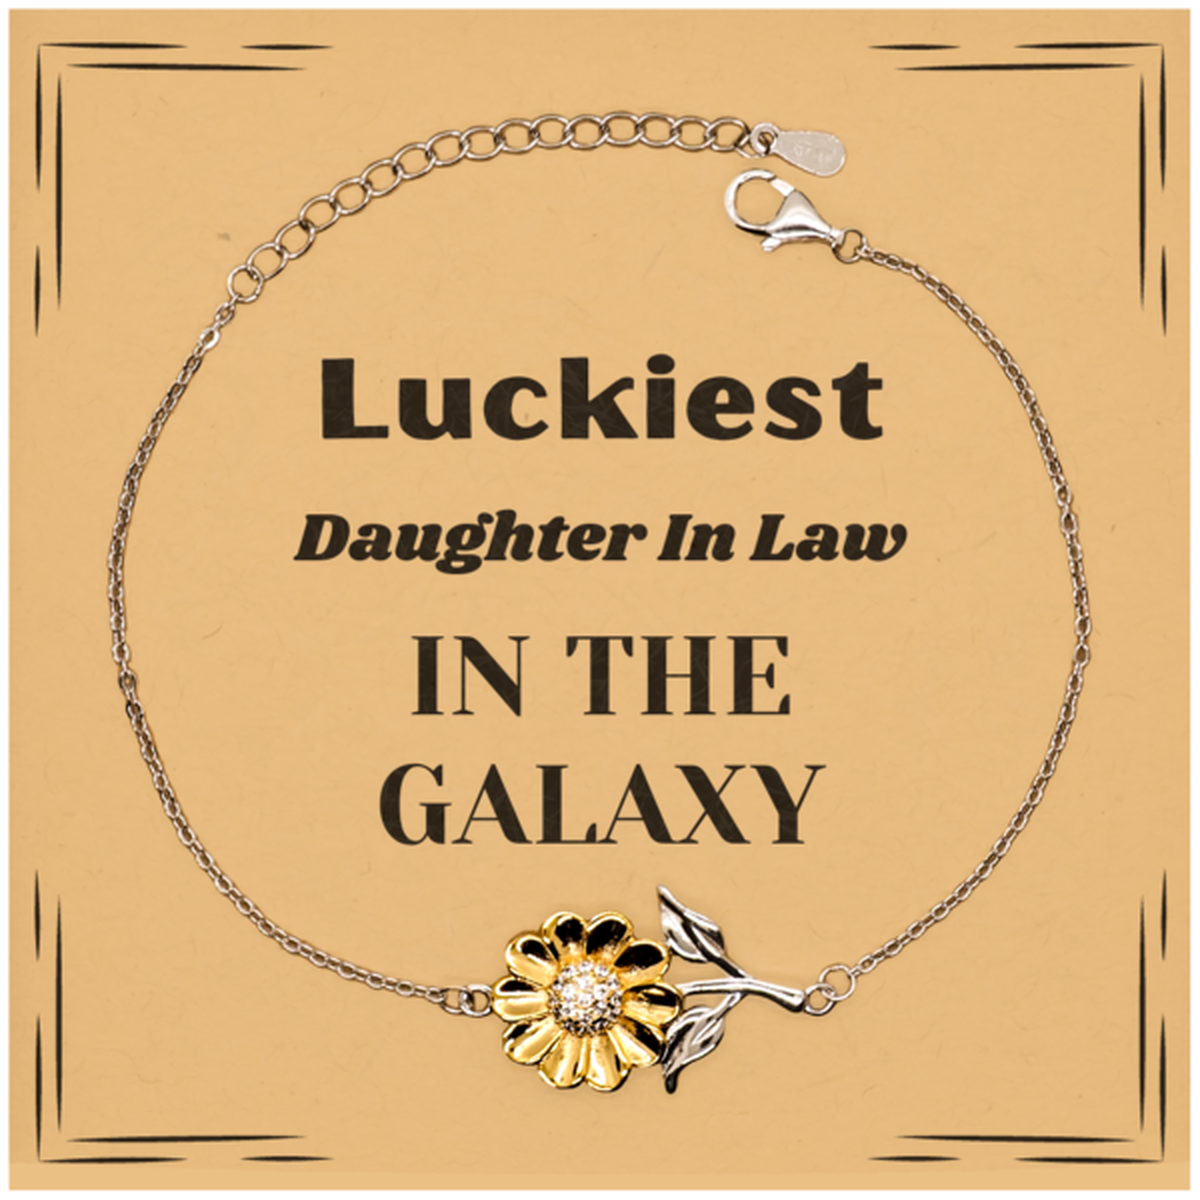 Luckiest Daughter In Law in the Galaxy, To My Daughter In Law Message Card Gifts, Christmas Daughter In Law Sunflower Bracelet Gifts, X-mas Birthday Unique Gifts For Daughter In Law Men Women